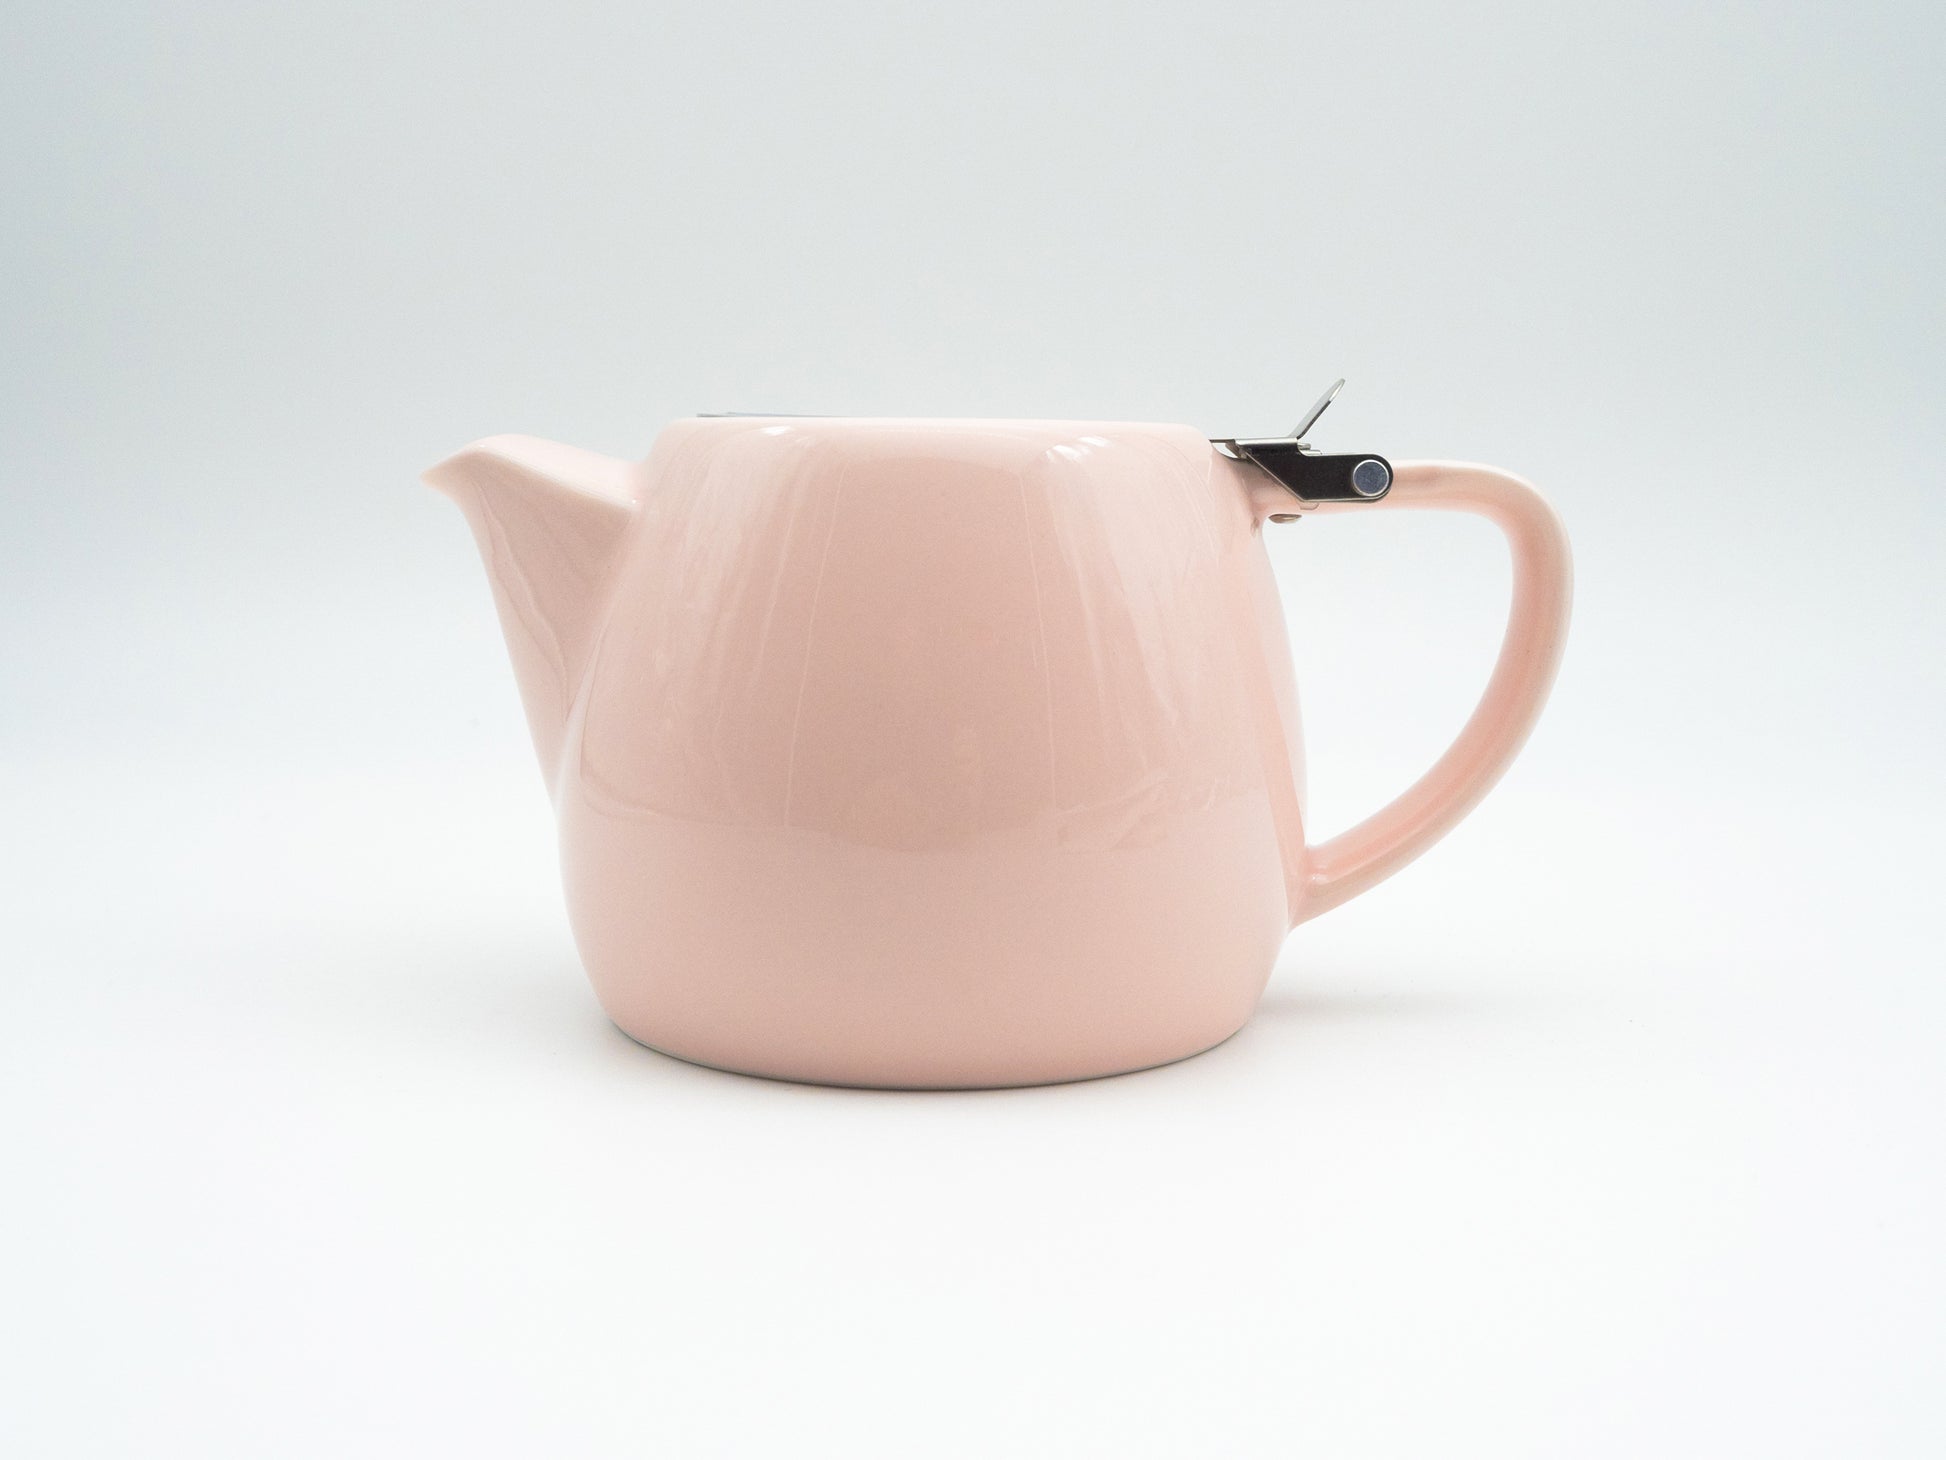 Light pink porcelain stump tea pot with stainless steel lid and infuser basket